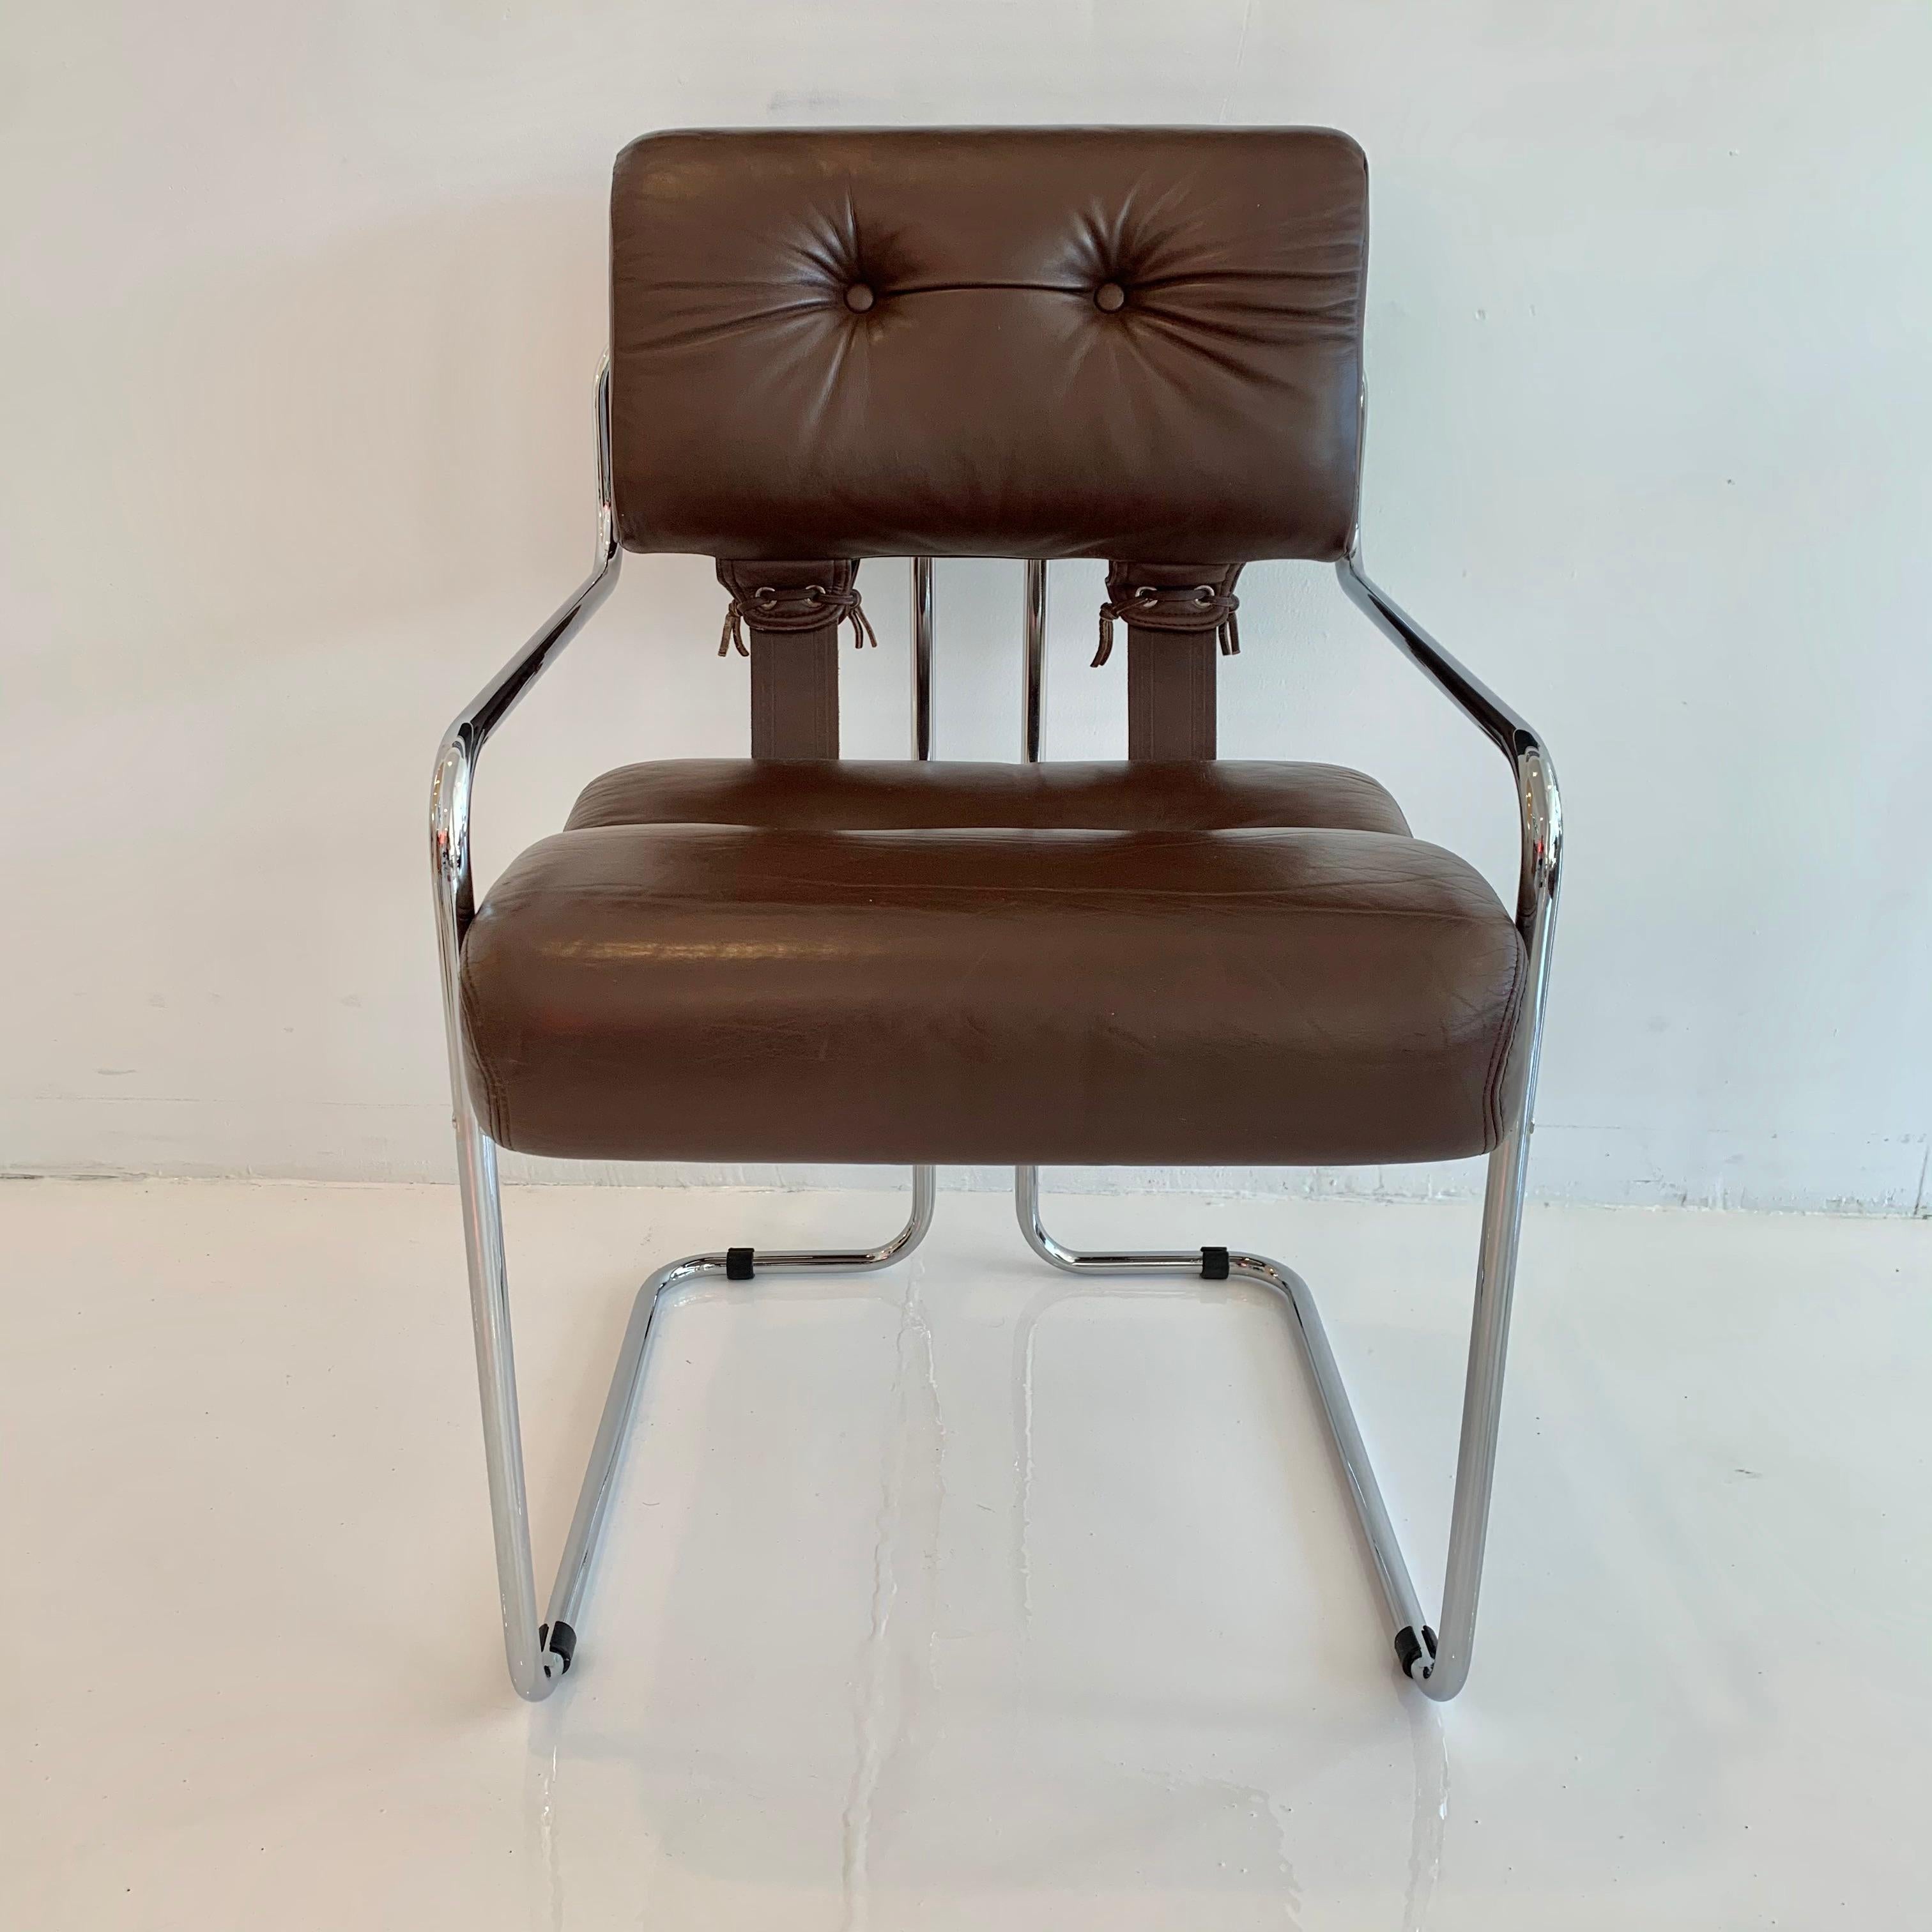 Classic leather chairs by Guido Faleschini for Pace. Tubular chrome chair with original brown leather. All metal has been re-plated in chrome and is in excellent condition. Great color and patina. Very good vintage condition to leather. 

6